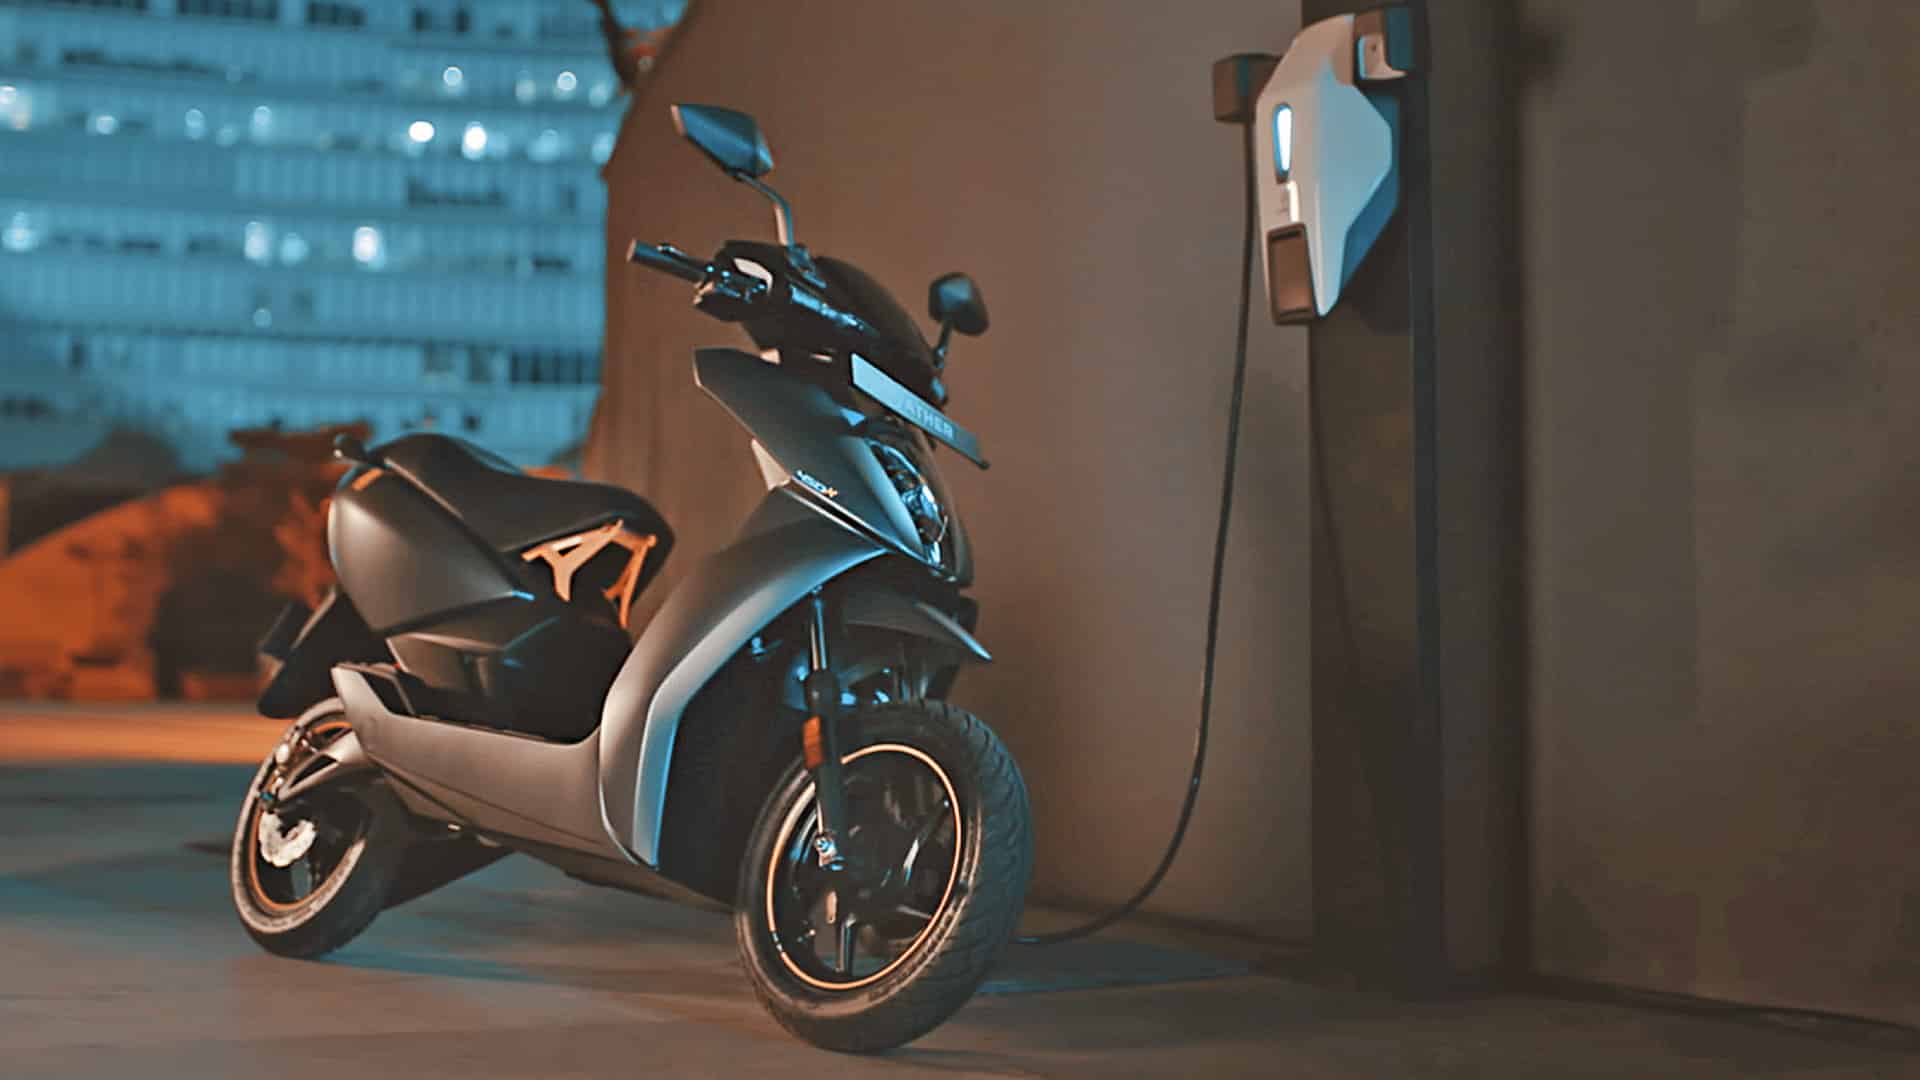 Electric two-wheelers may account for 10 pc of overall sales in 2-3 yrs: Ather Energy